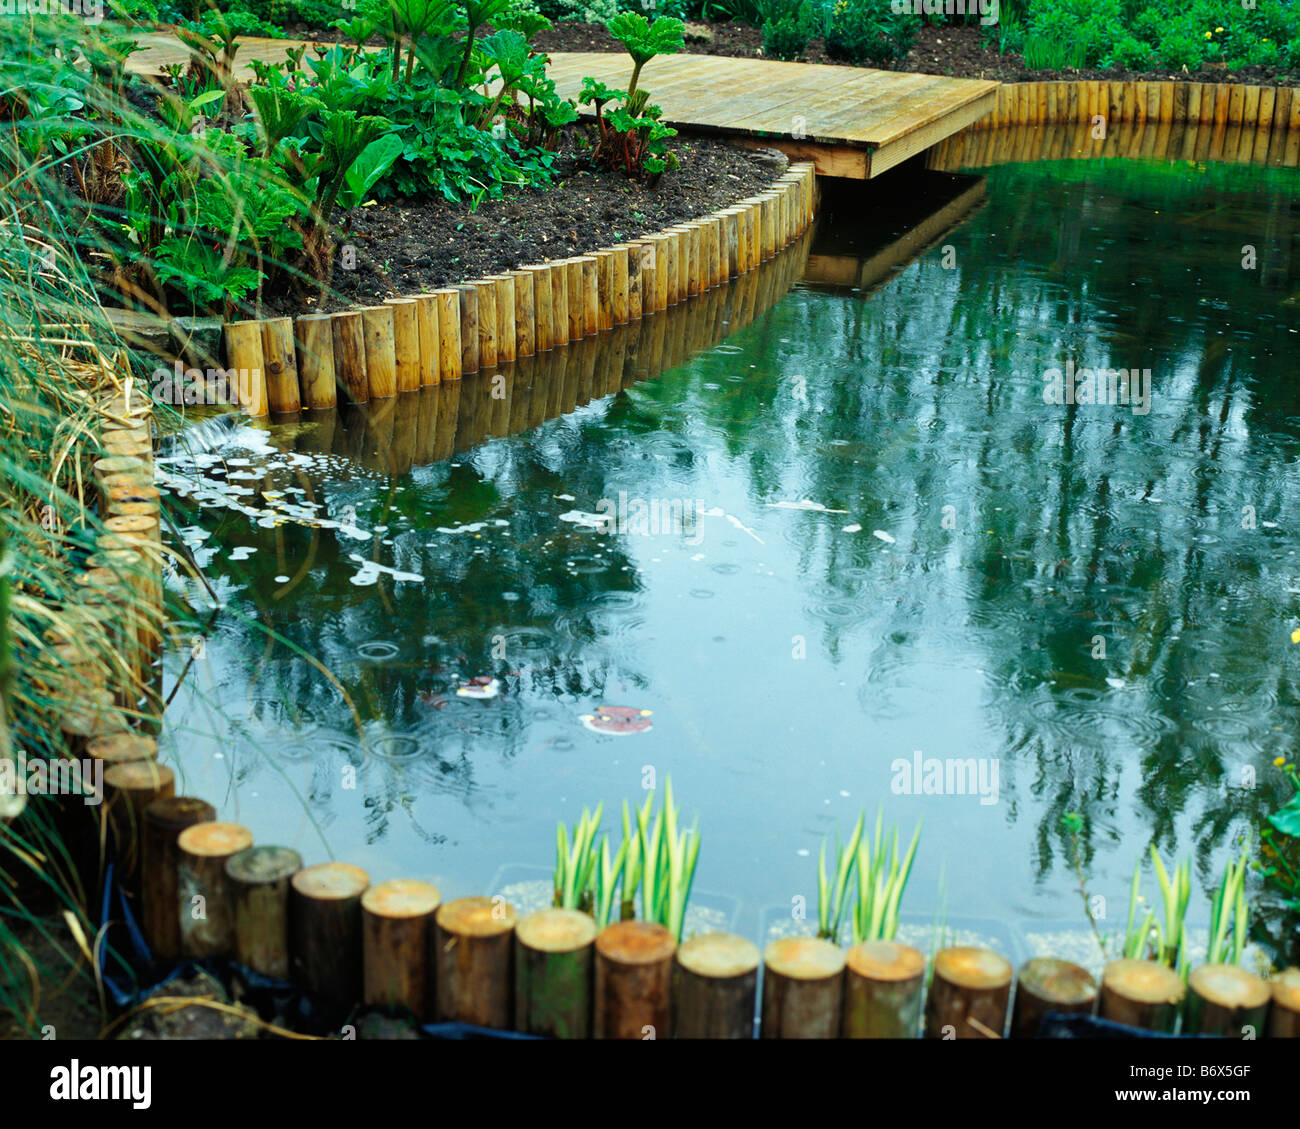 TREATED POLES CAN BE USED TO SUPPORT THE POND EDGE Stock Photo